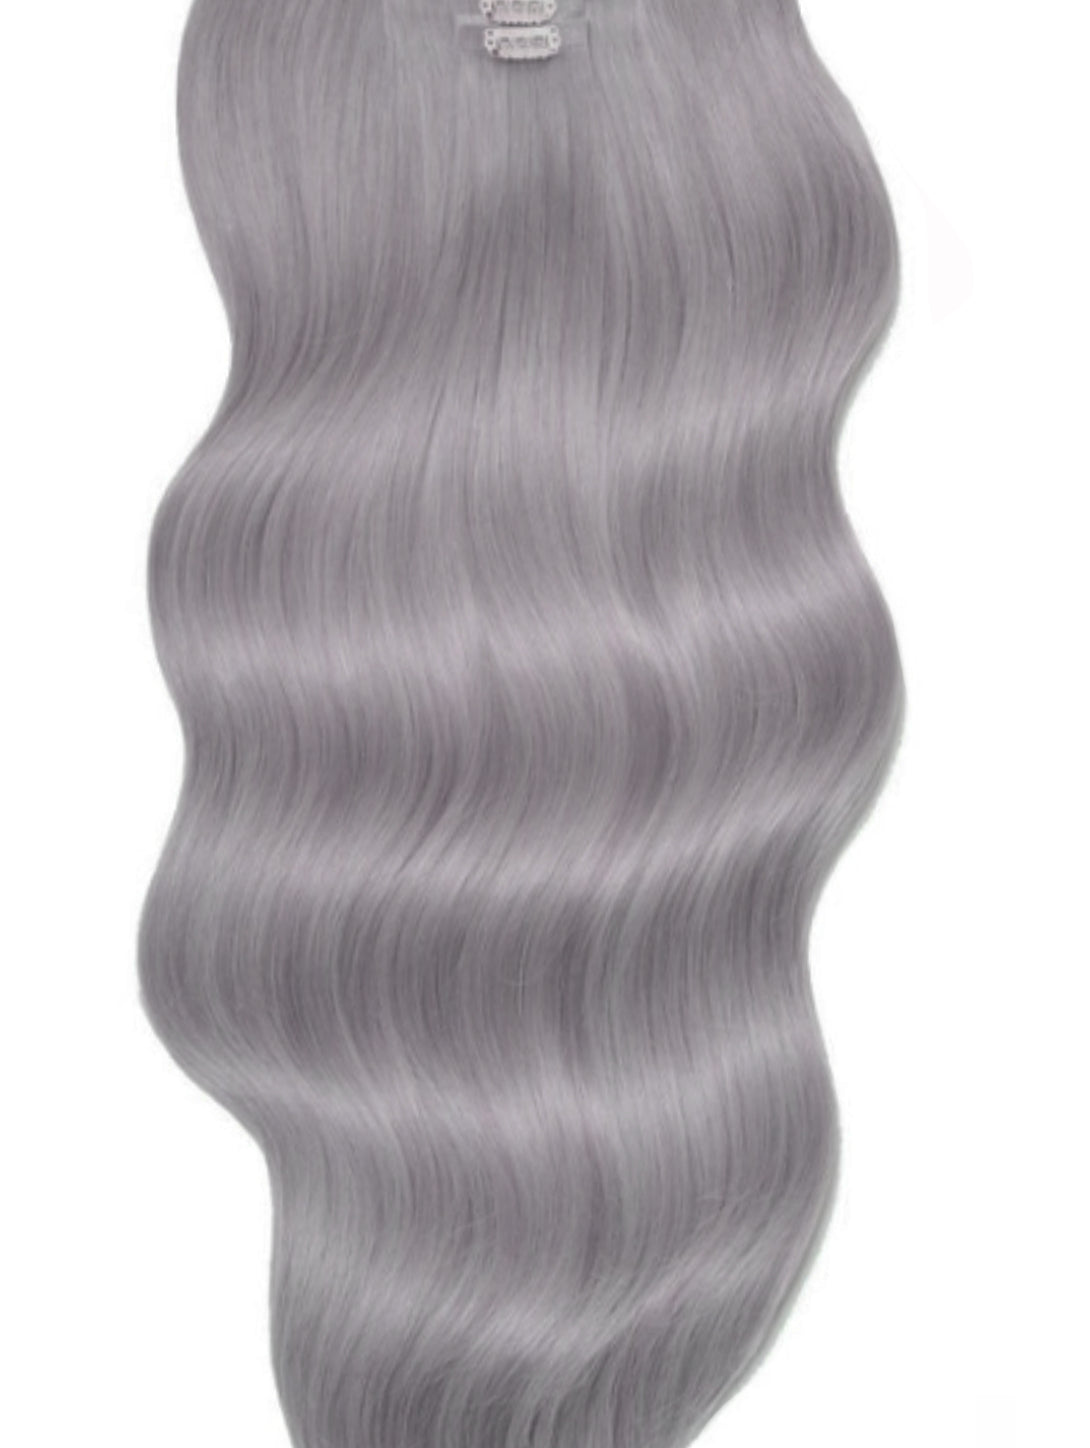 GREY EXTRA THICK CLIP IN HAIR EXTENSIONS 